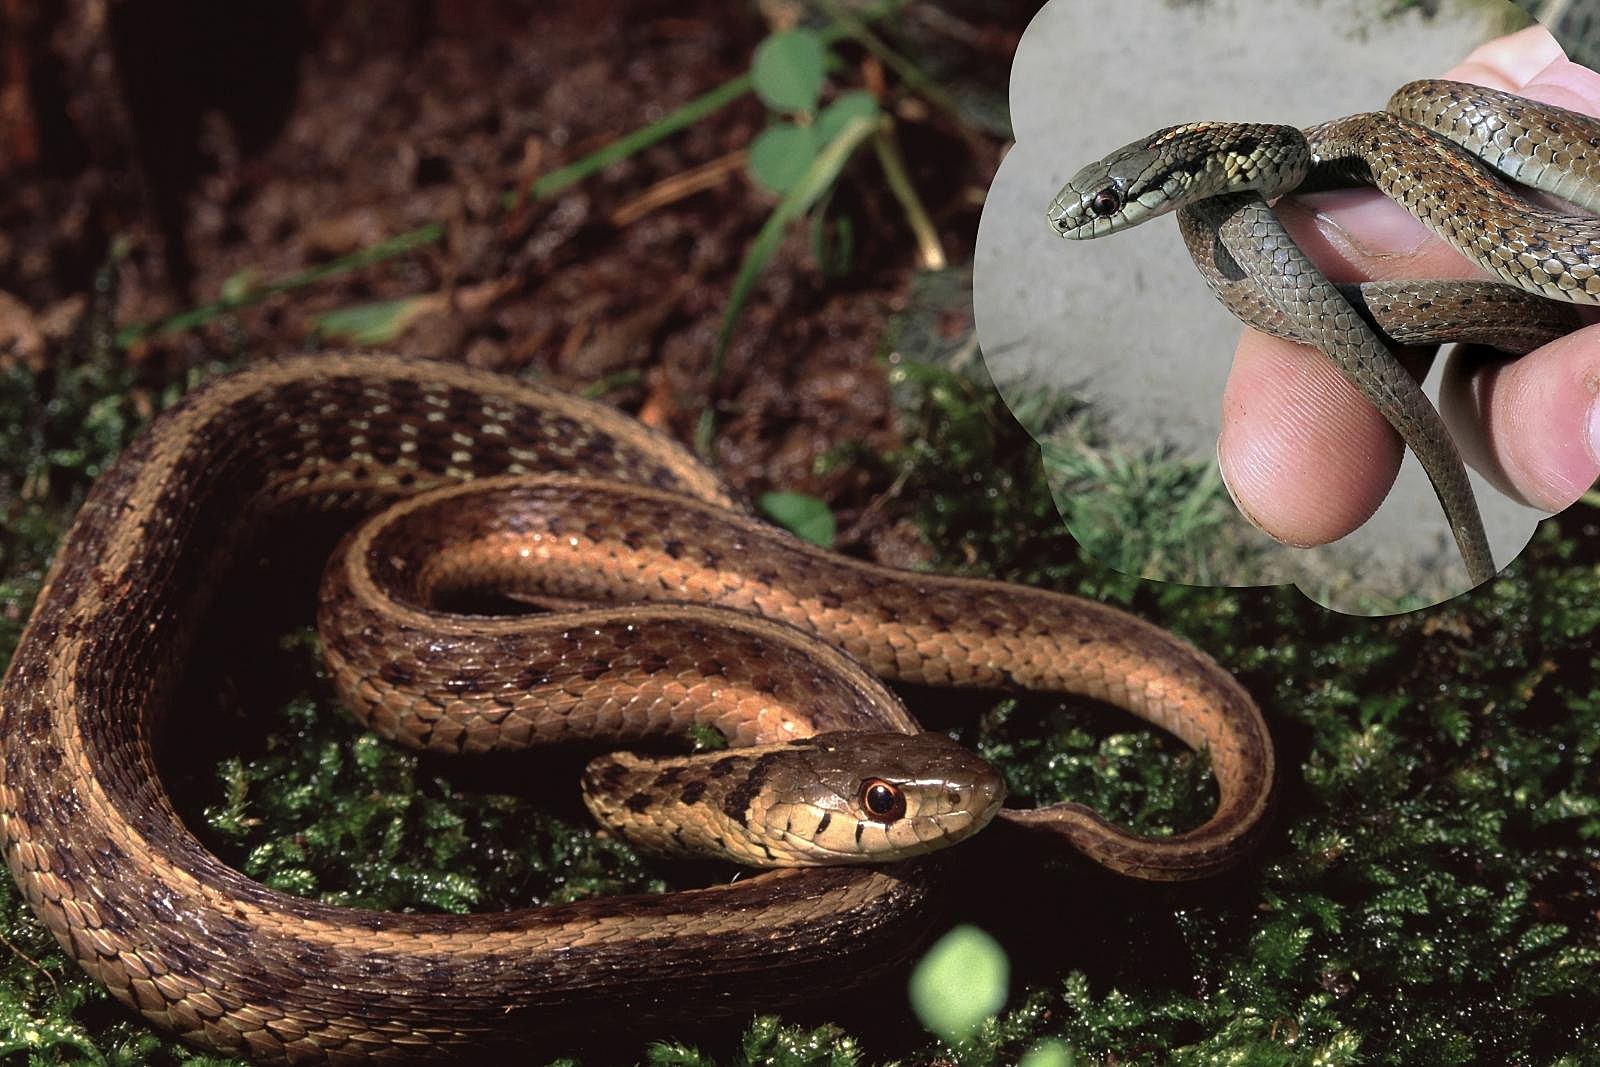 A northwestern garter snake coiled, with an inset of one being held by a human hand.